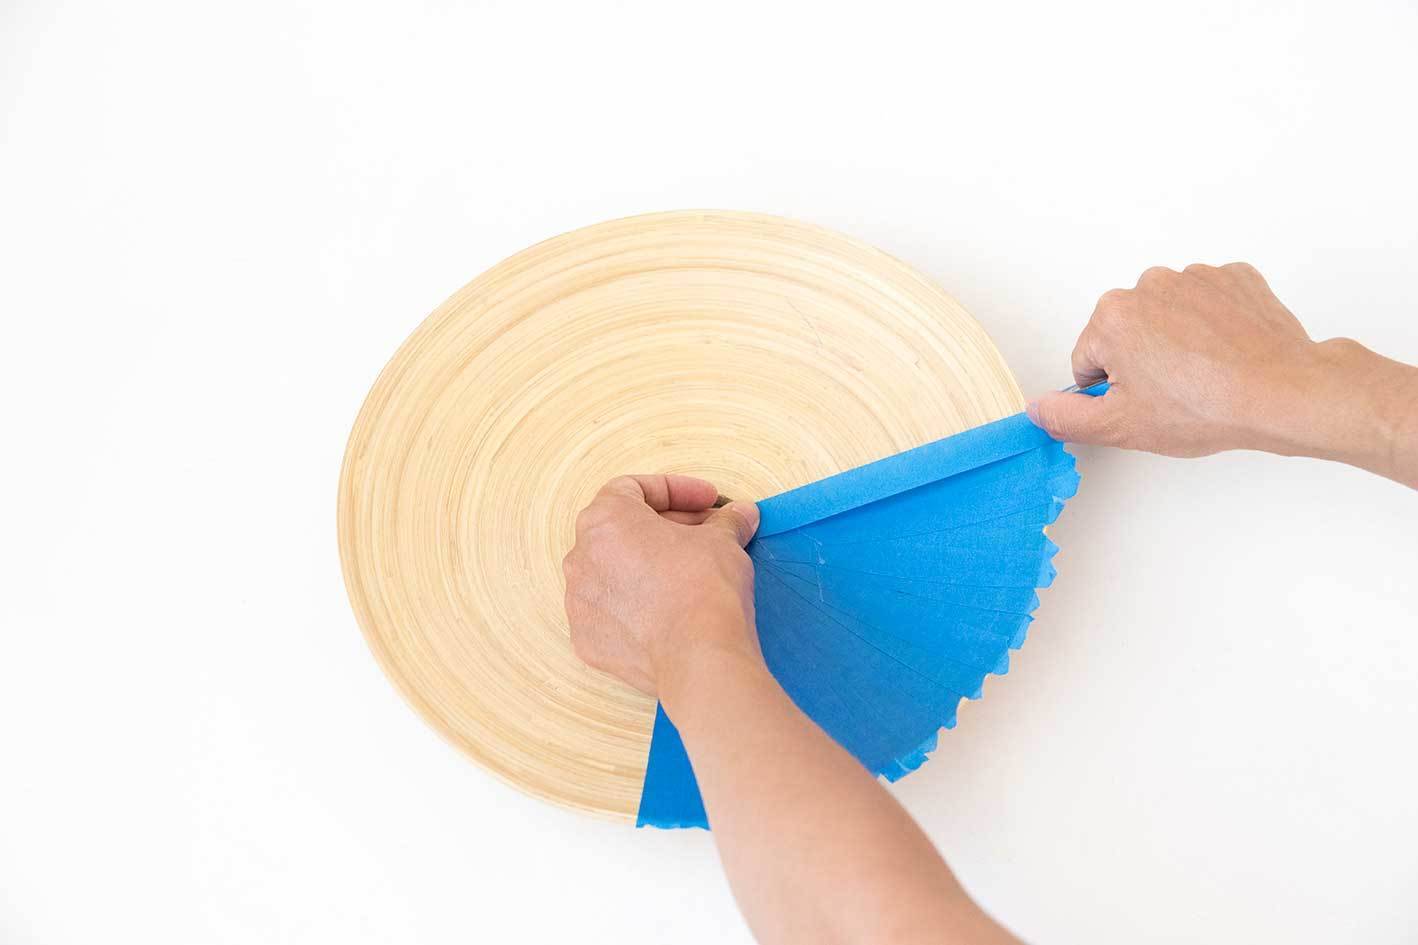 Painter's tape - Ikea hack: Make a pendant light out of a $6 bowl!